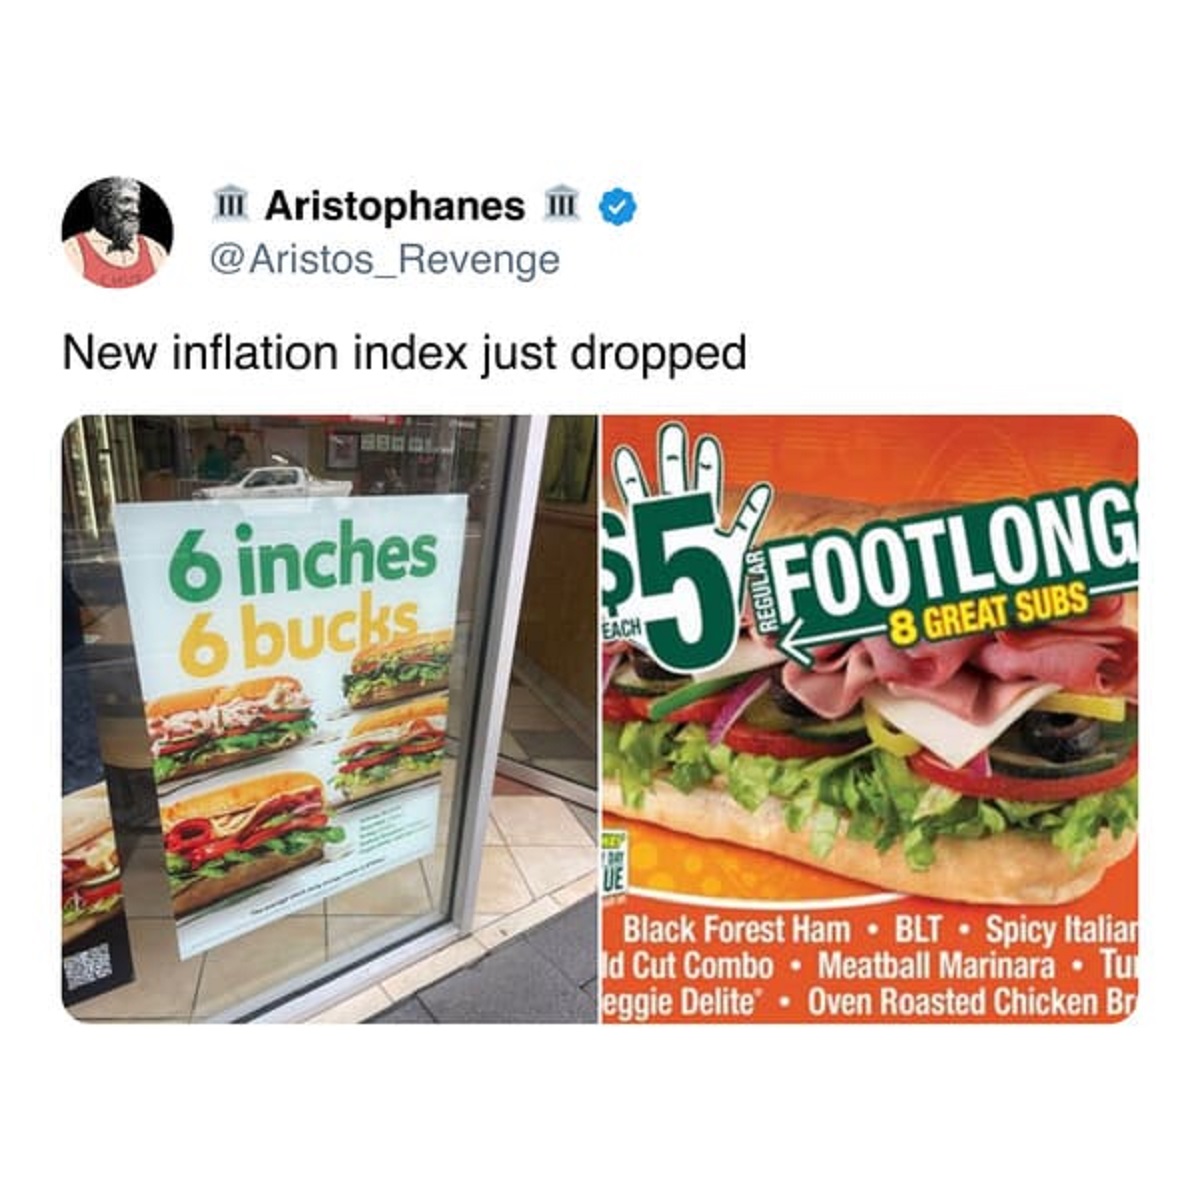 5 foot long - Iii Aristophanes Iii Revenge New inflation index just dropped 6 inches 6 bucks Aa $5 Footlong Each 8 Great Subs Black Forest Ham Blt Spicy Italian Tu d Cut Combo Meatball Marinara eggie Delite Oven Roasted Chicken Br